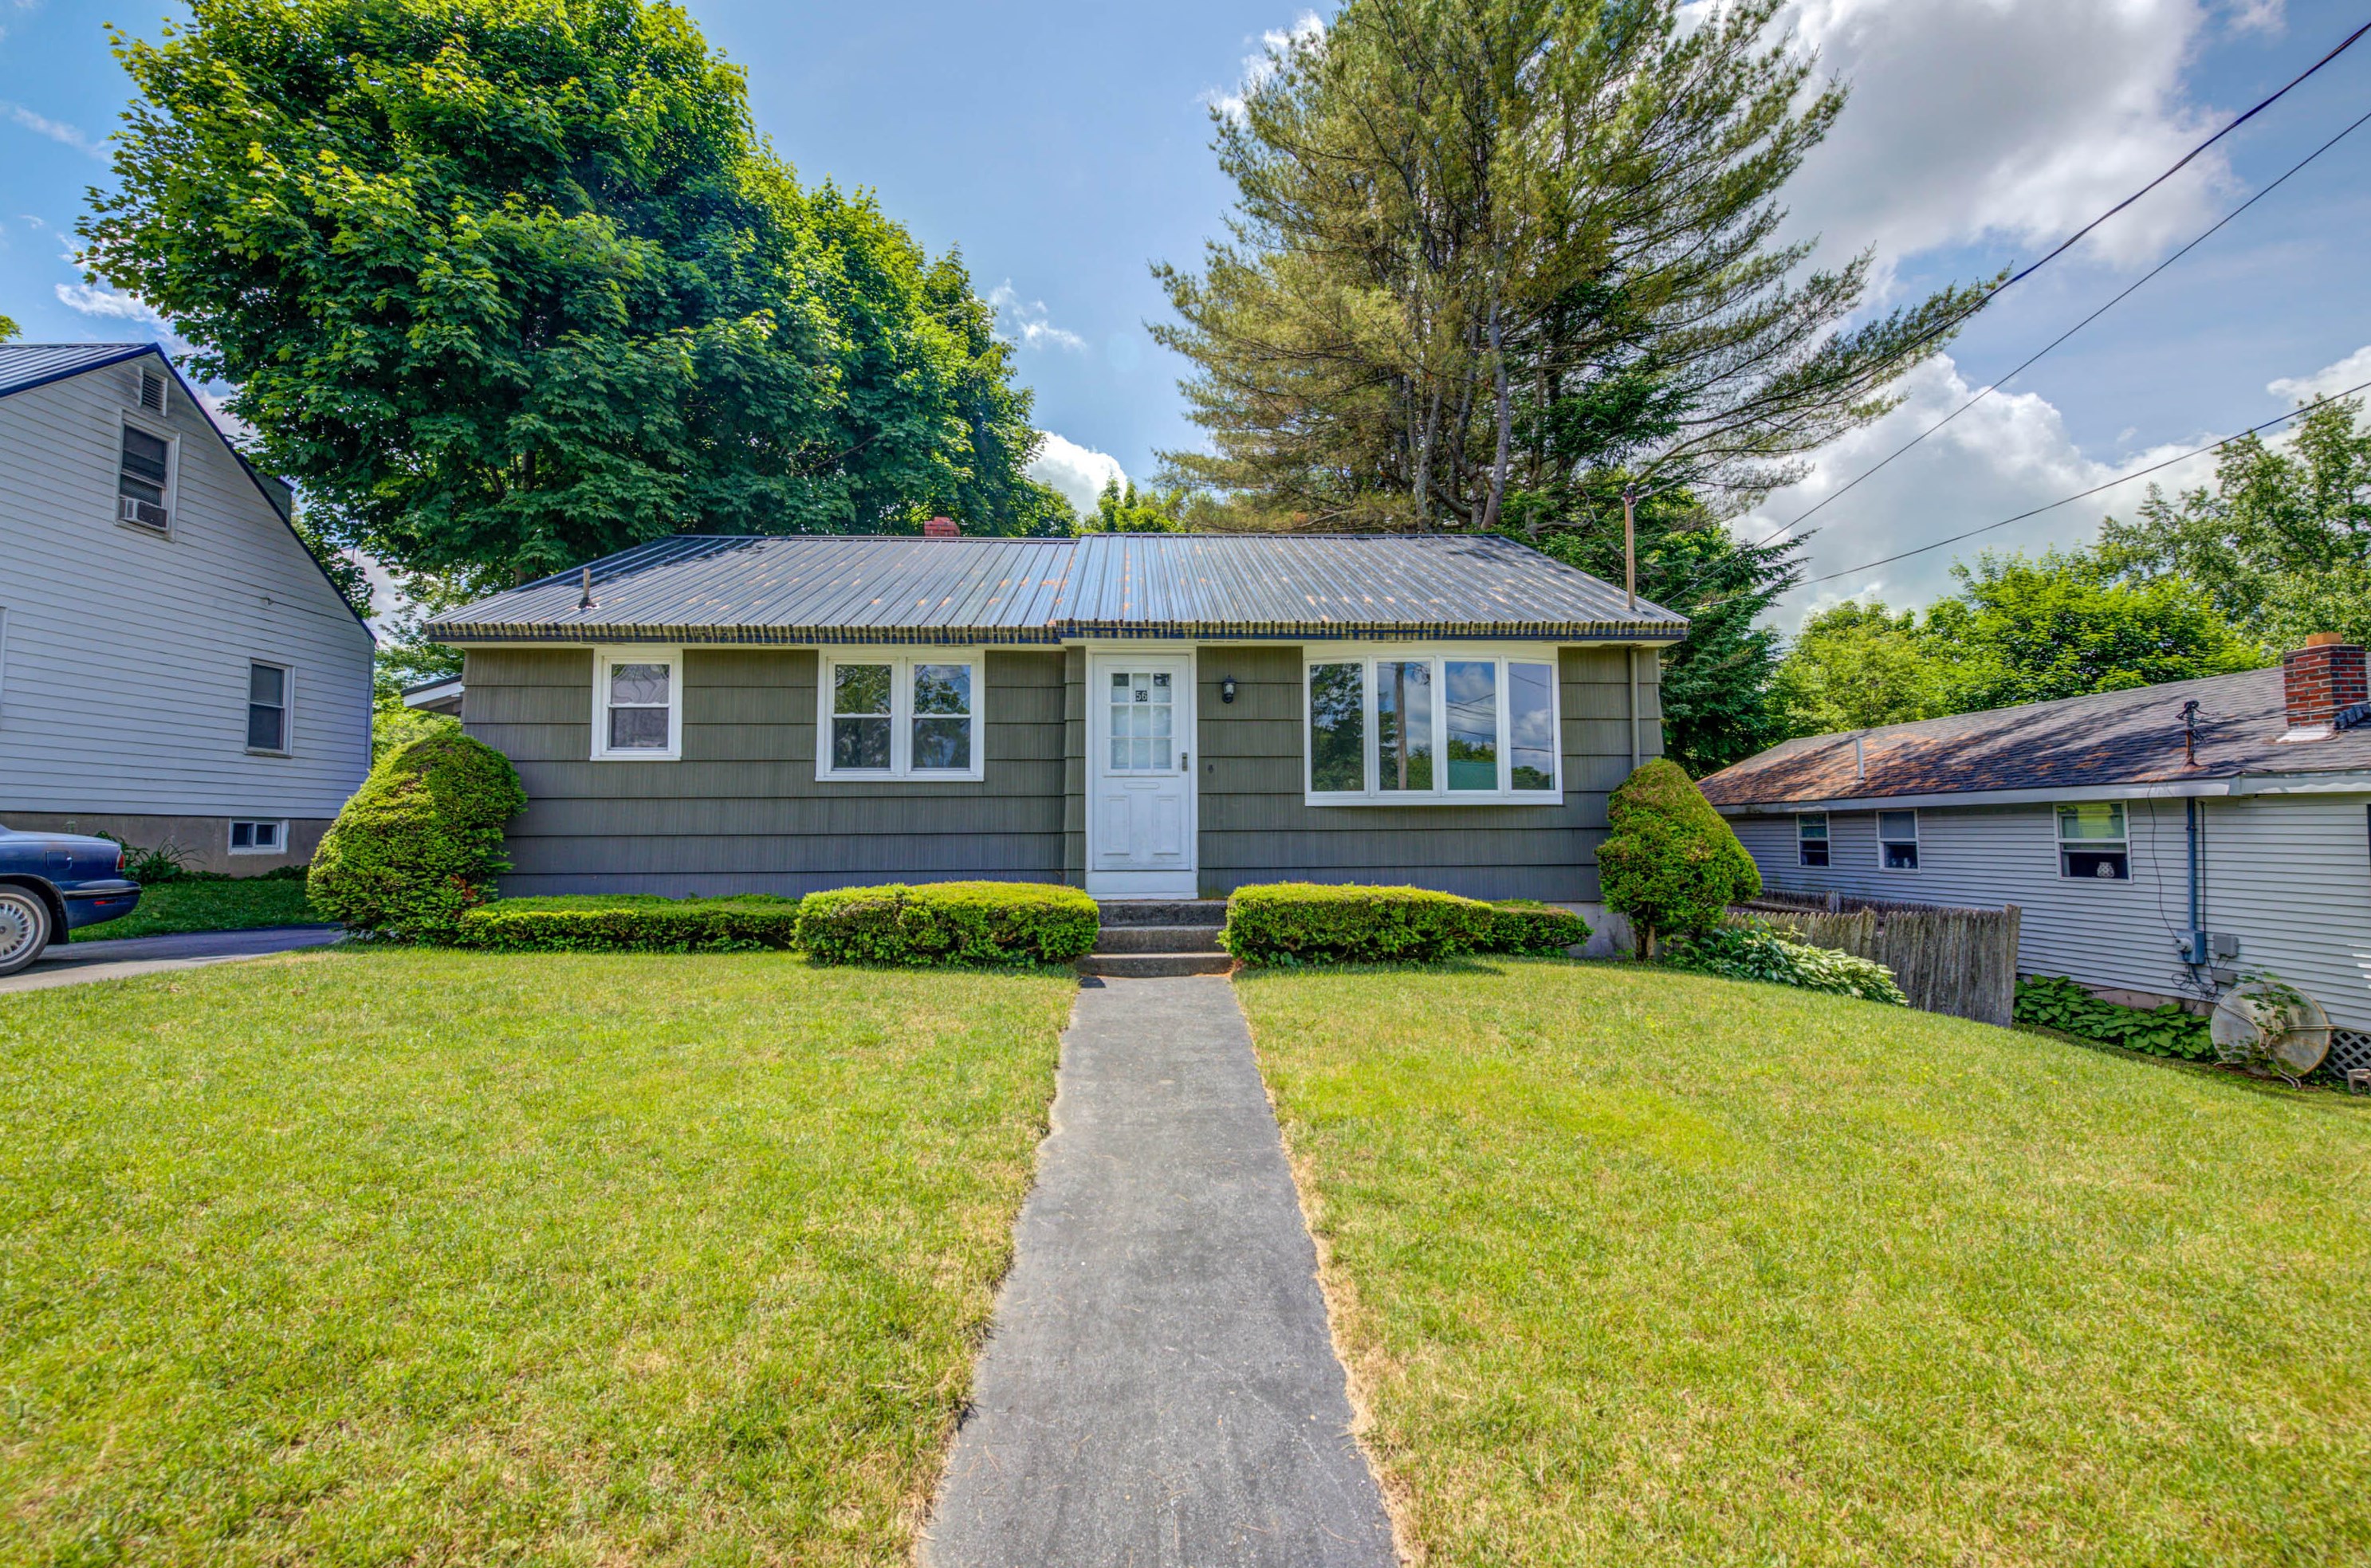 56 Newland Ave, Augusta, ME 04330